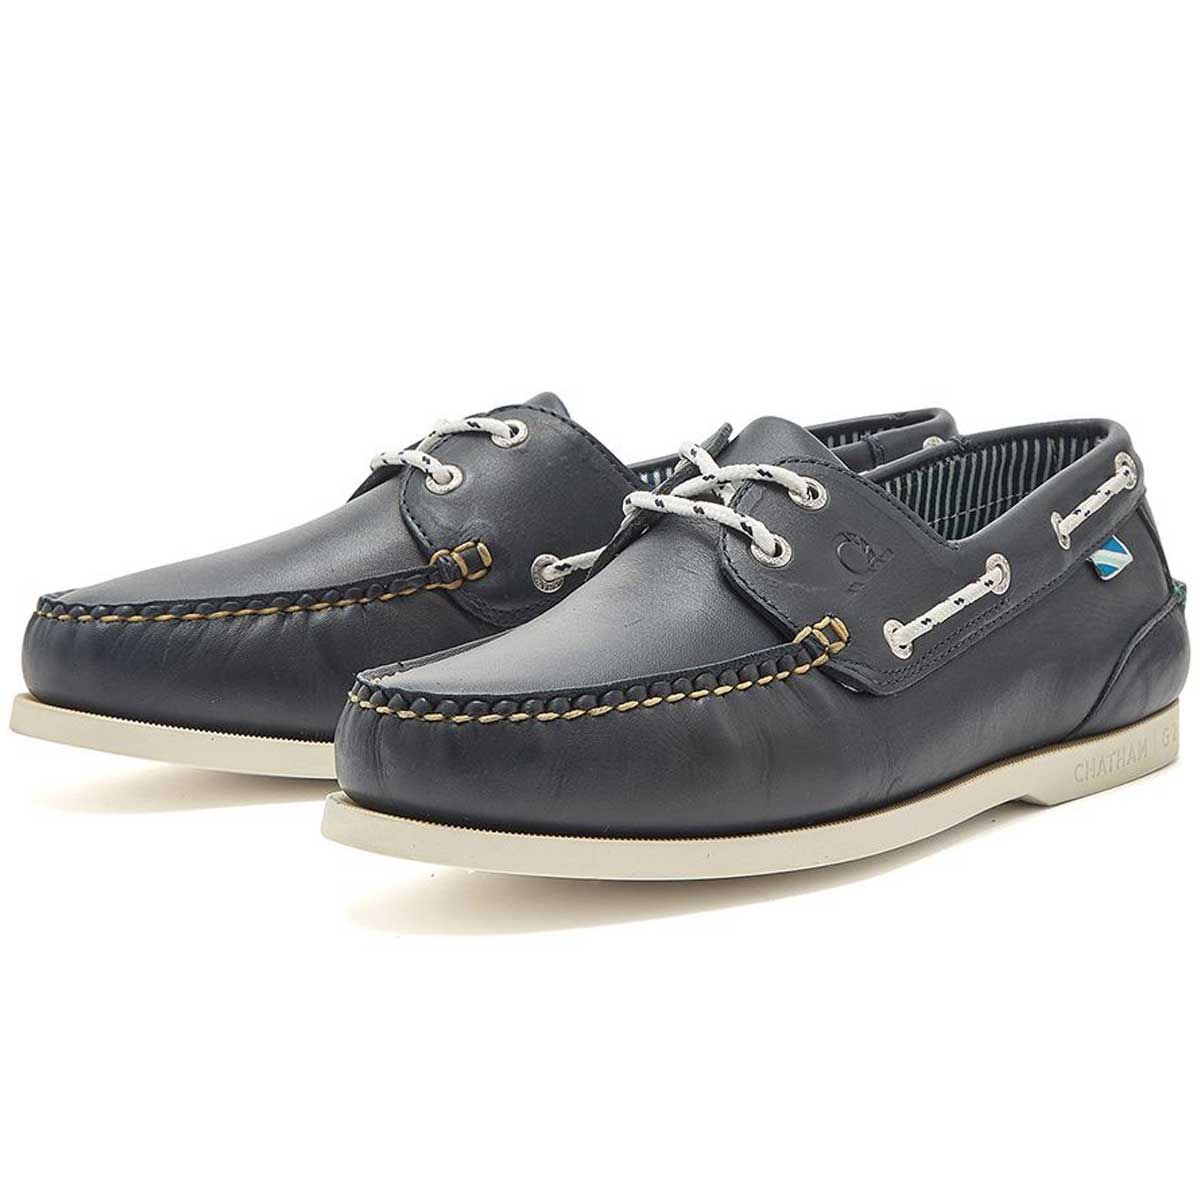 CHATHAM Crew G2 Premium Leather Boat Shoes - Men's - Navy